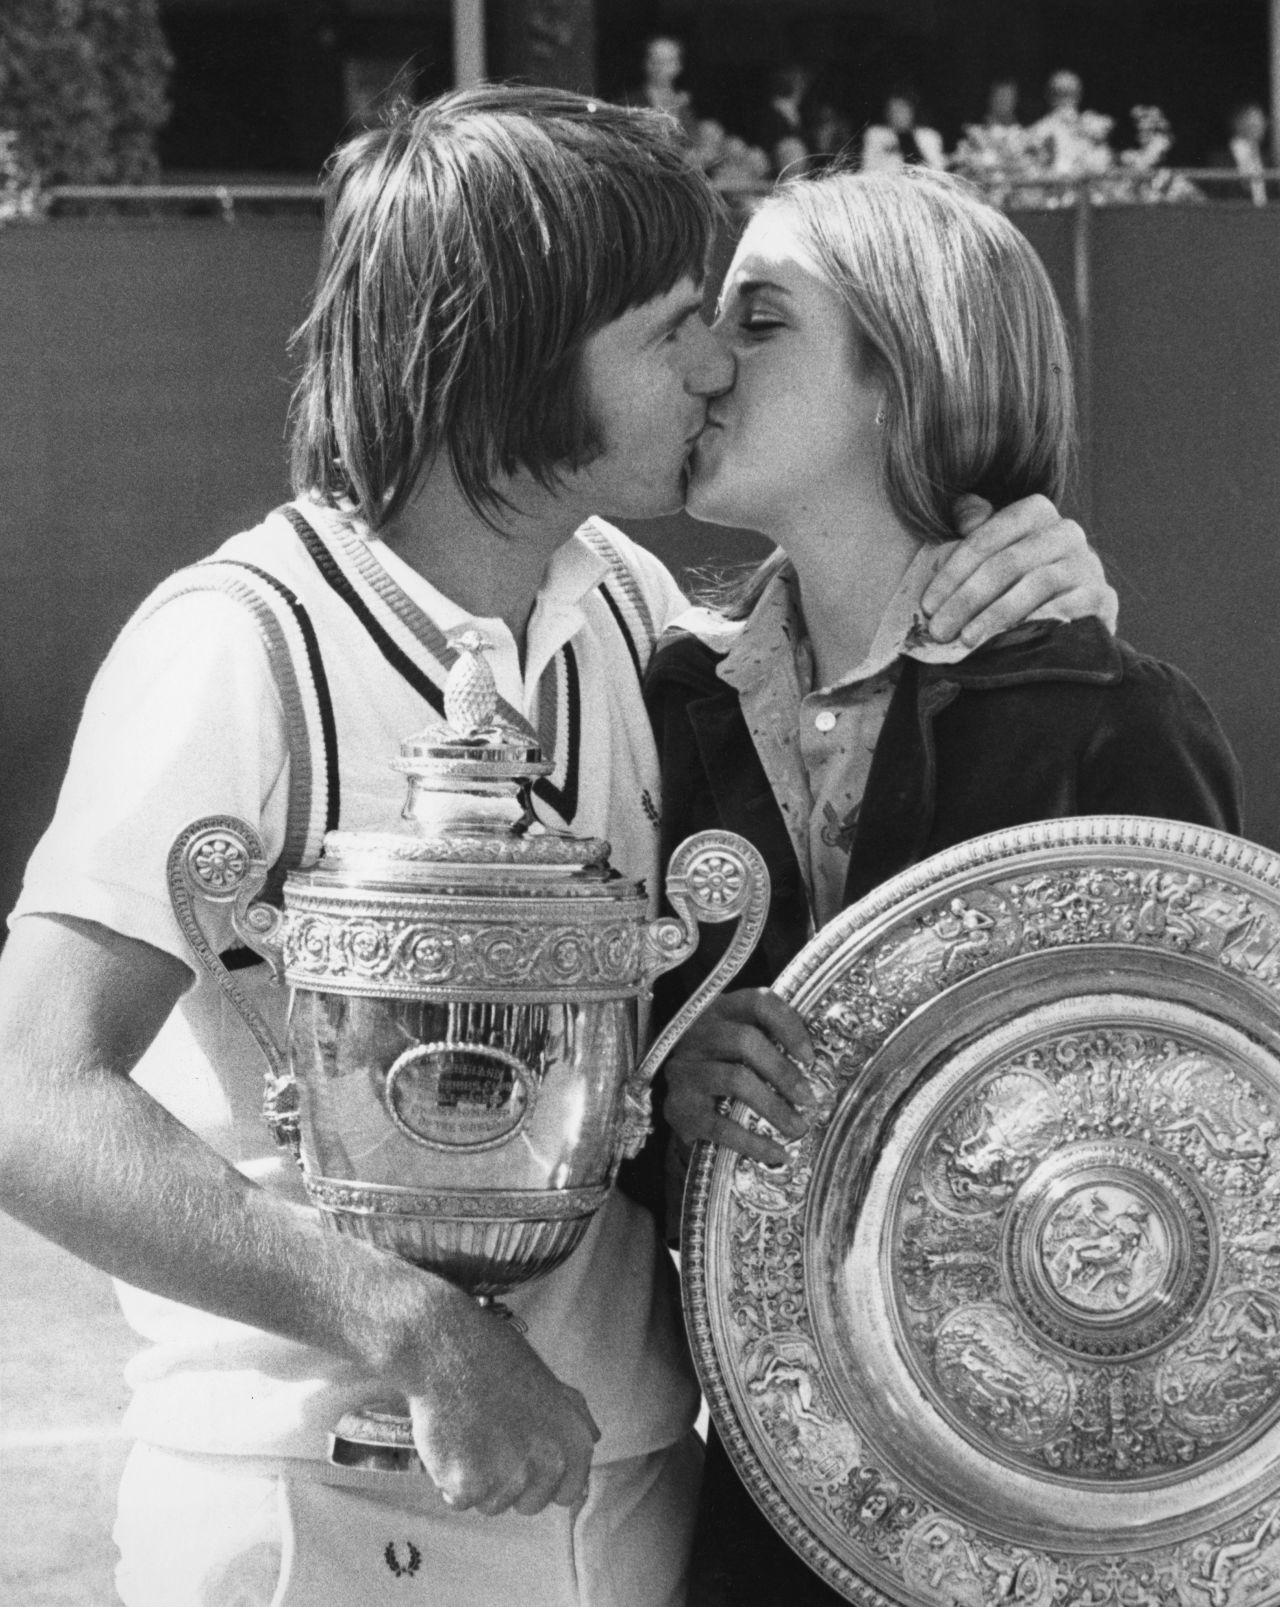 Chris Evert's romance with Jimmy Connors was one that captivated the sporting world after they both won Wimbledon singles titles in 1974, but a planned wedding in November that year was called off. Tennis writer Peter Bodo famously said of the couple: "It was a match made in heaven, not on Earth, which is probably why it didn't last."